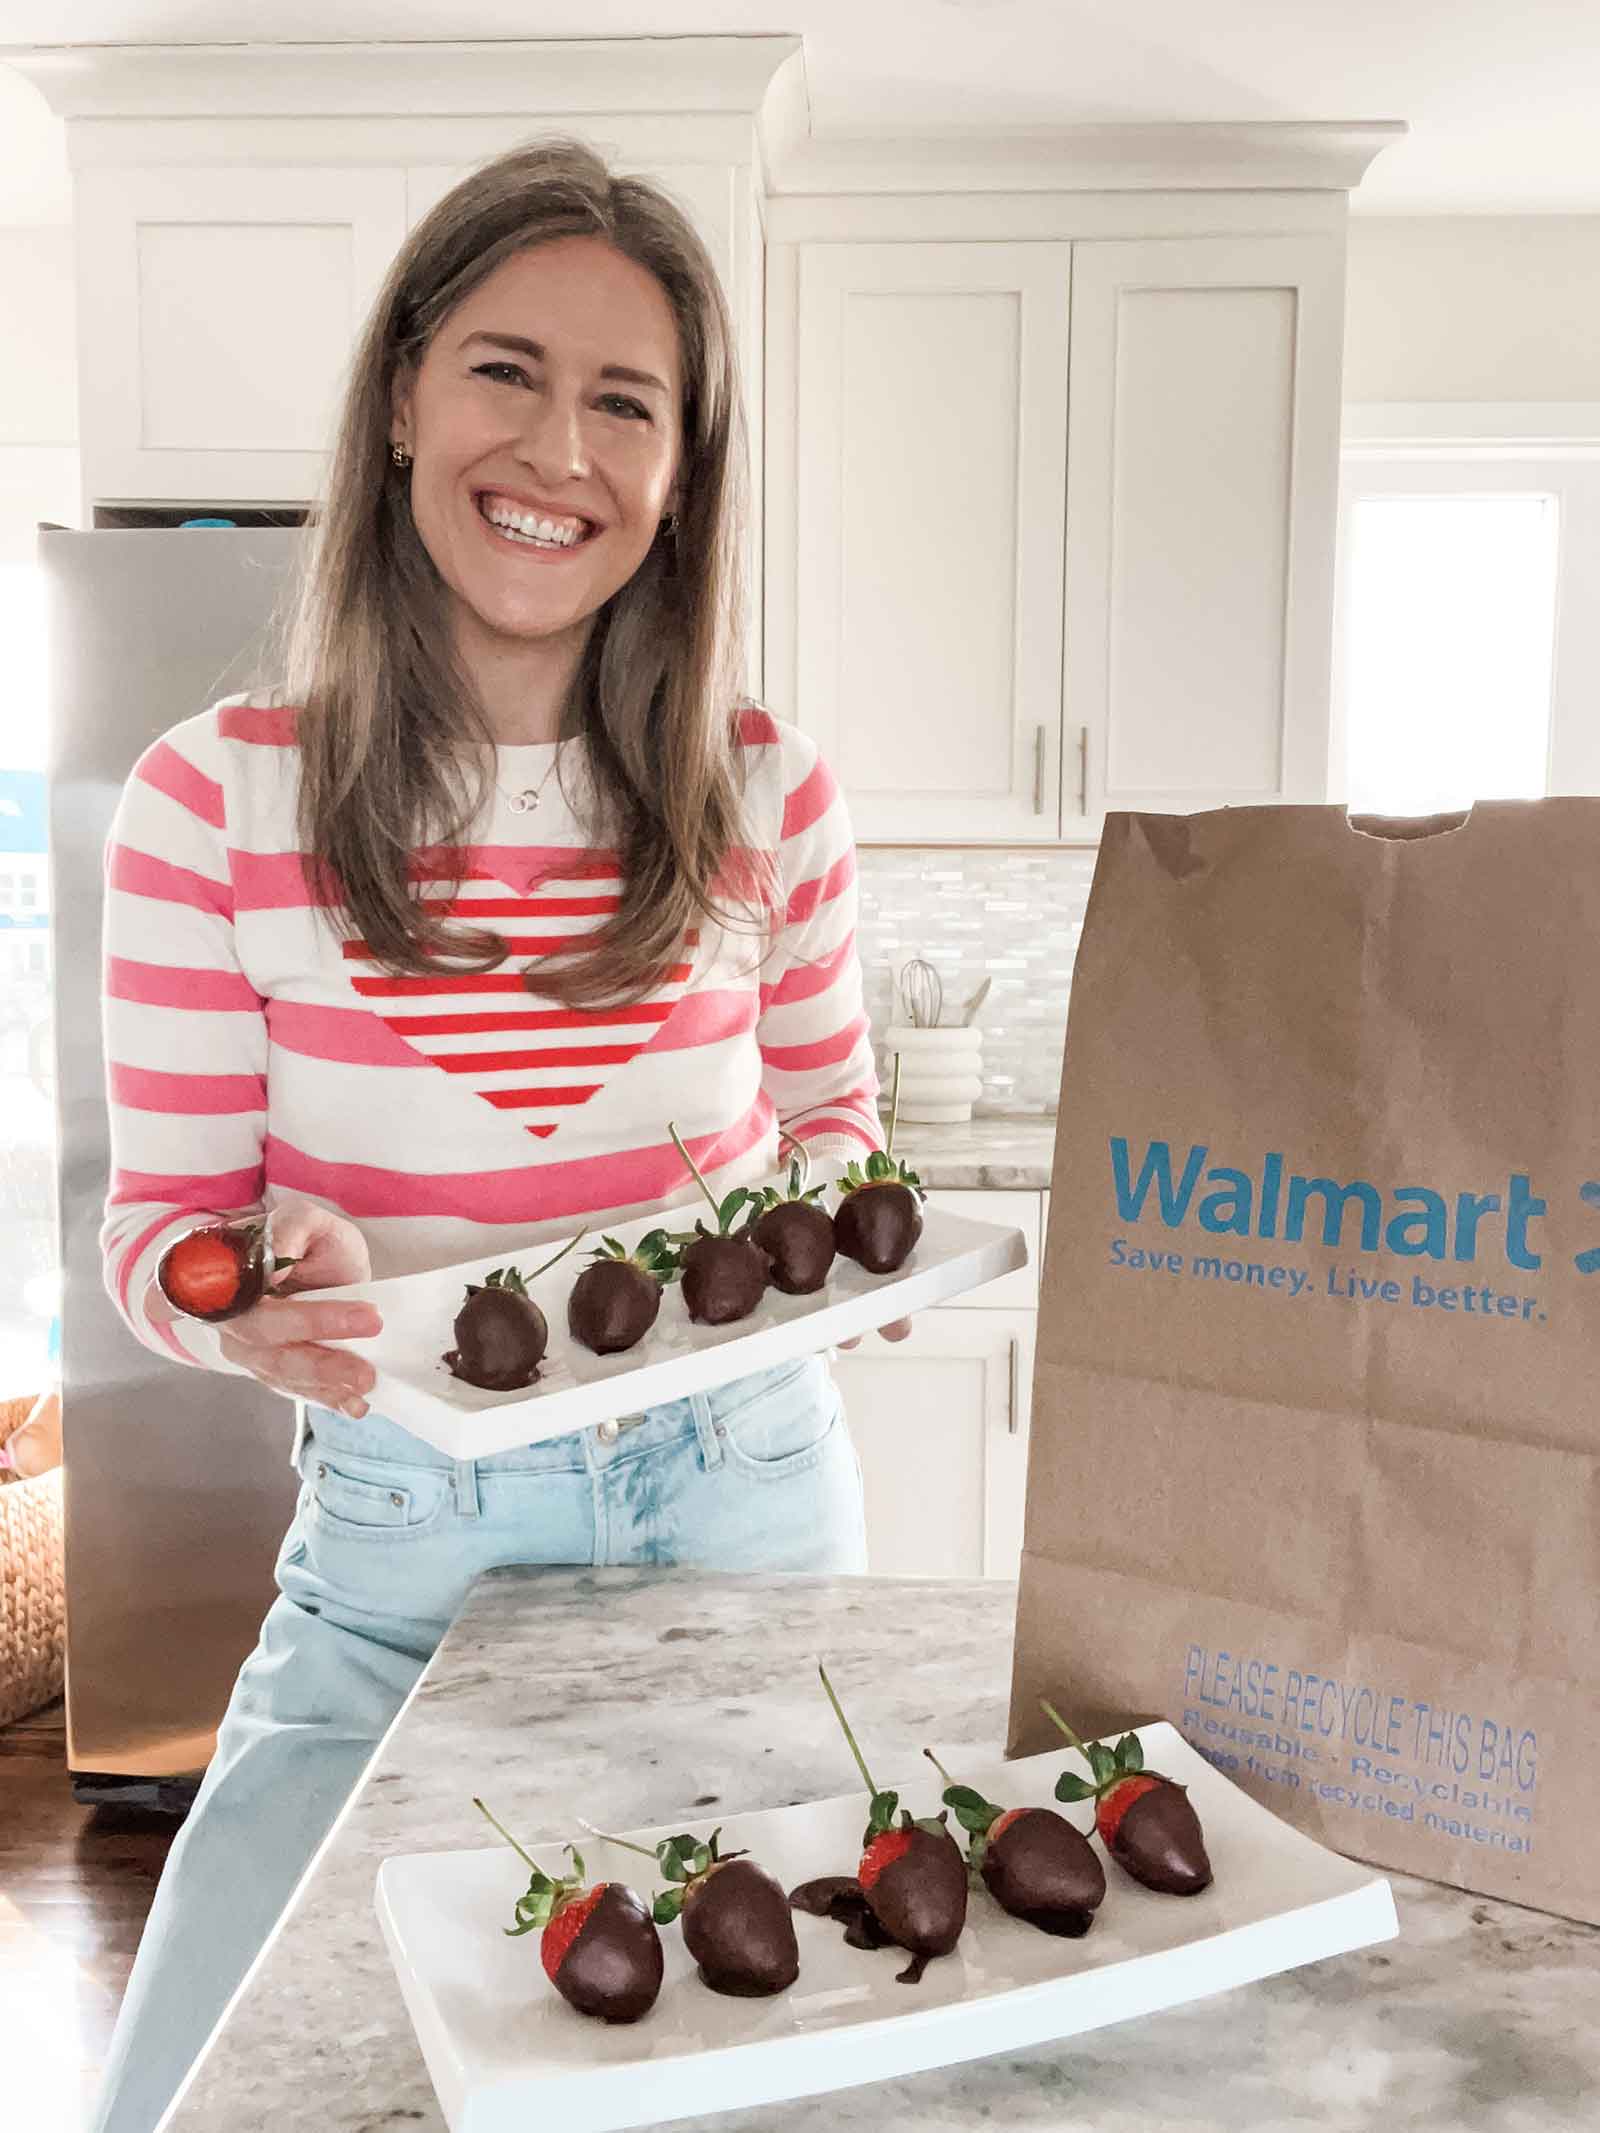 Easy dairy free chocolate covered strawberries recipe (tastes better than store bought!)